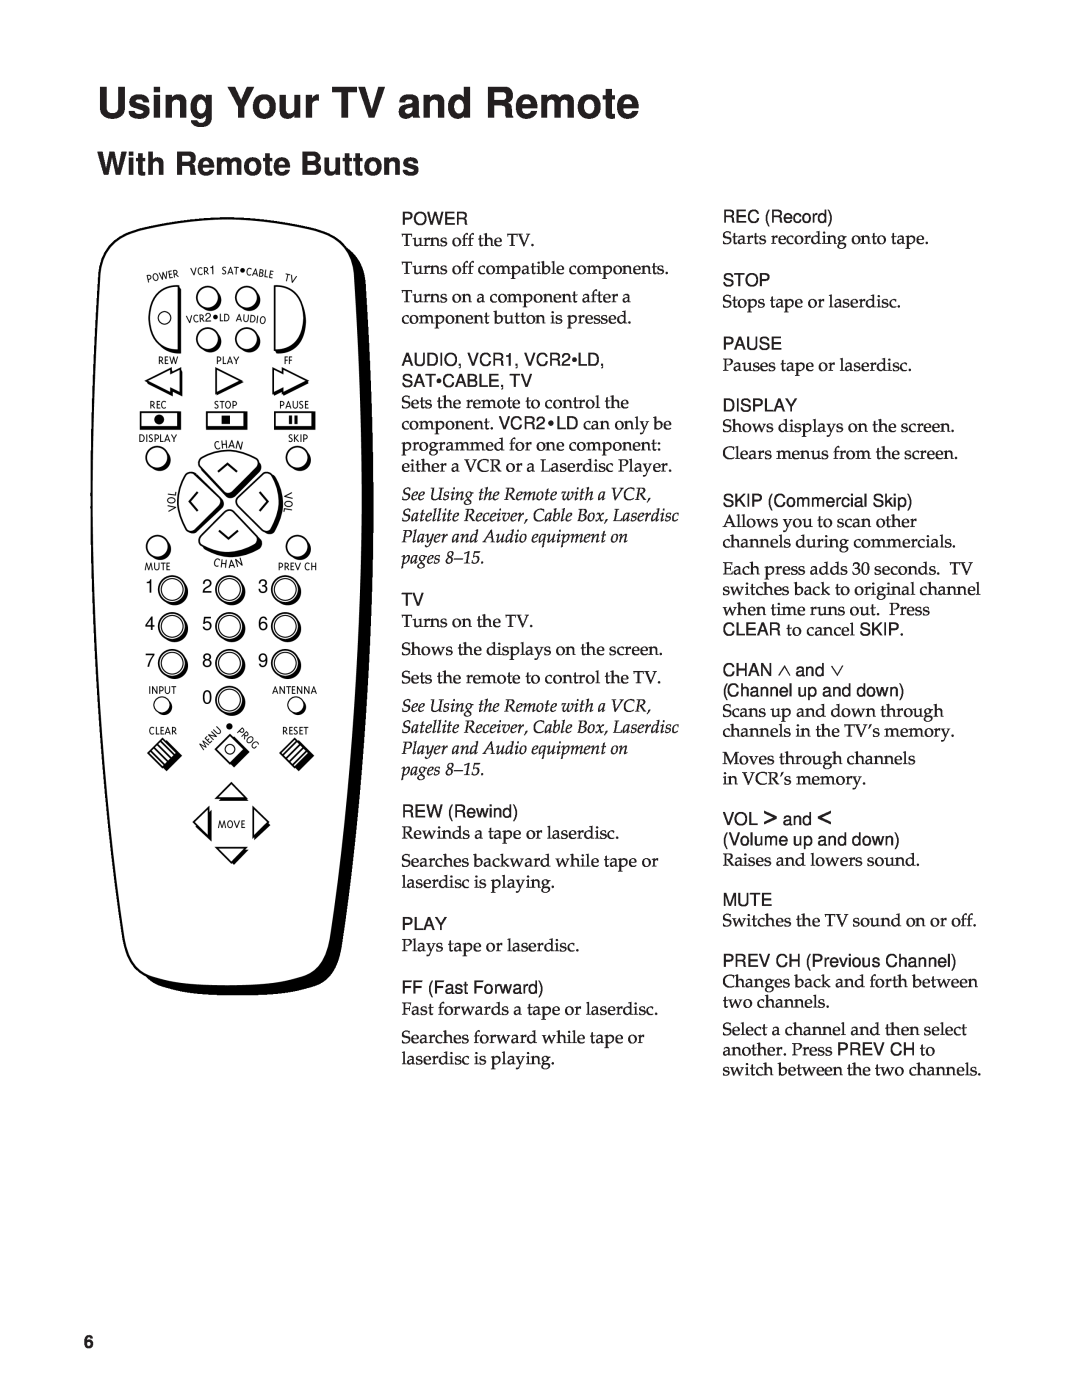 RCA RBA27500, 27000 manual Using Your TV and Remote, With Remote Buttons, 1 2 4 5 7 8 